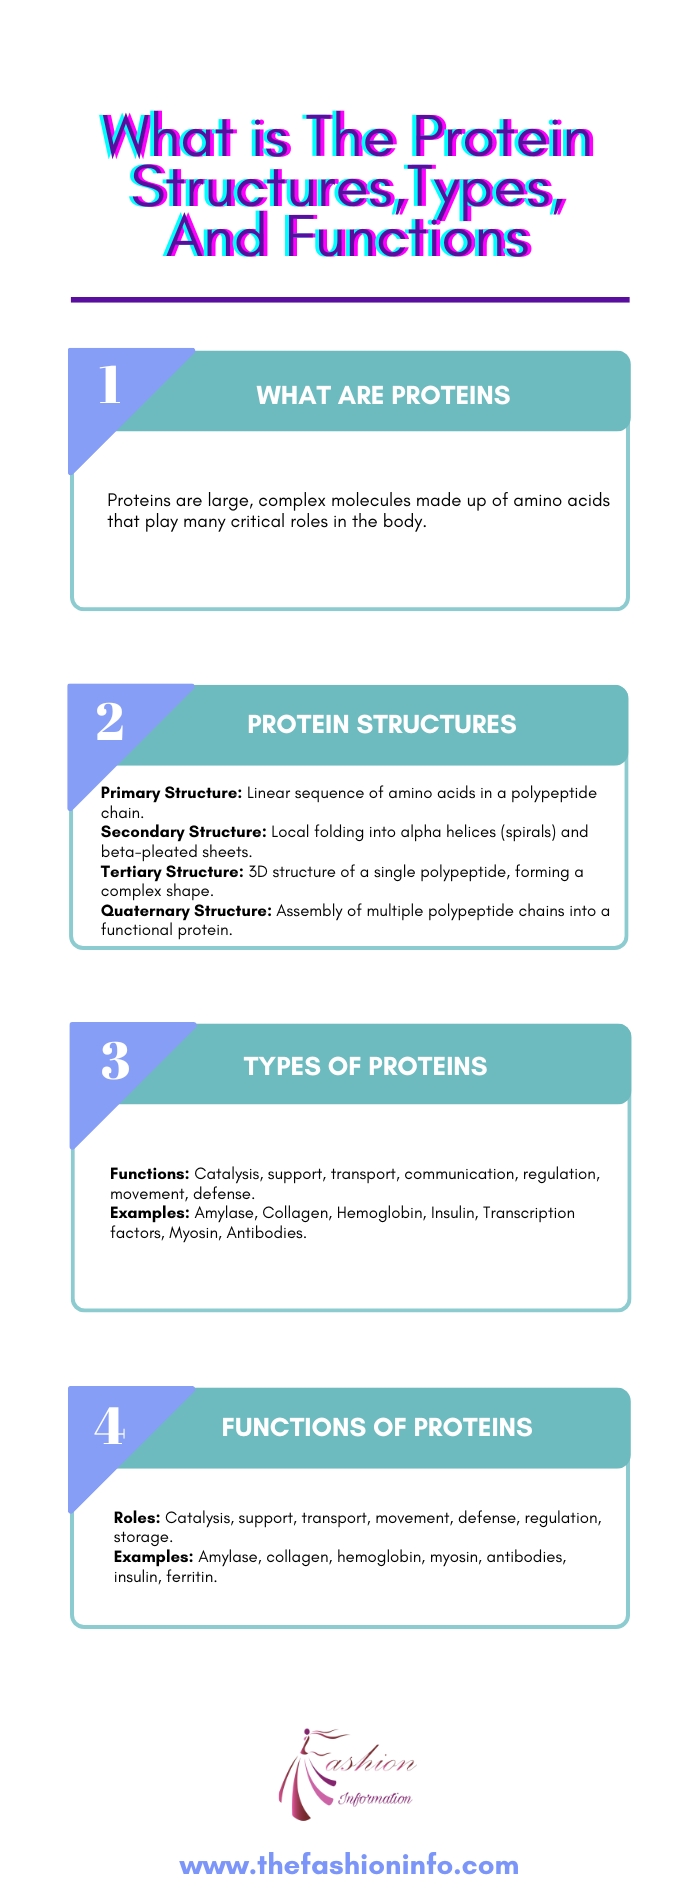 What is The Protein Structures,Types, And Functions